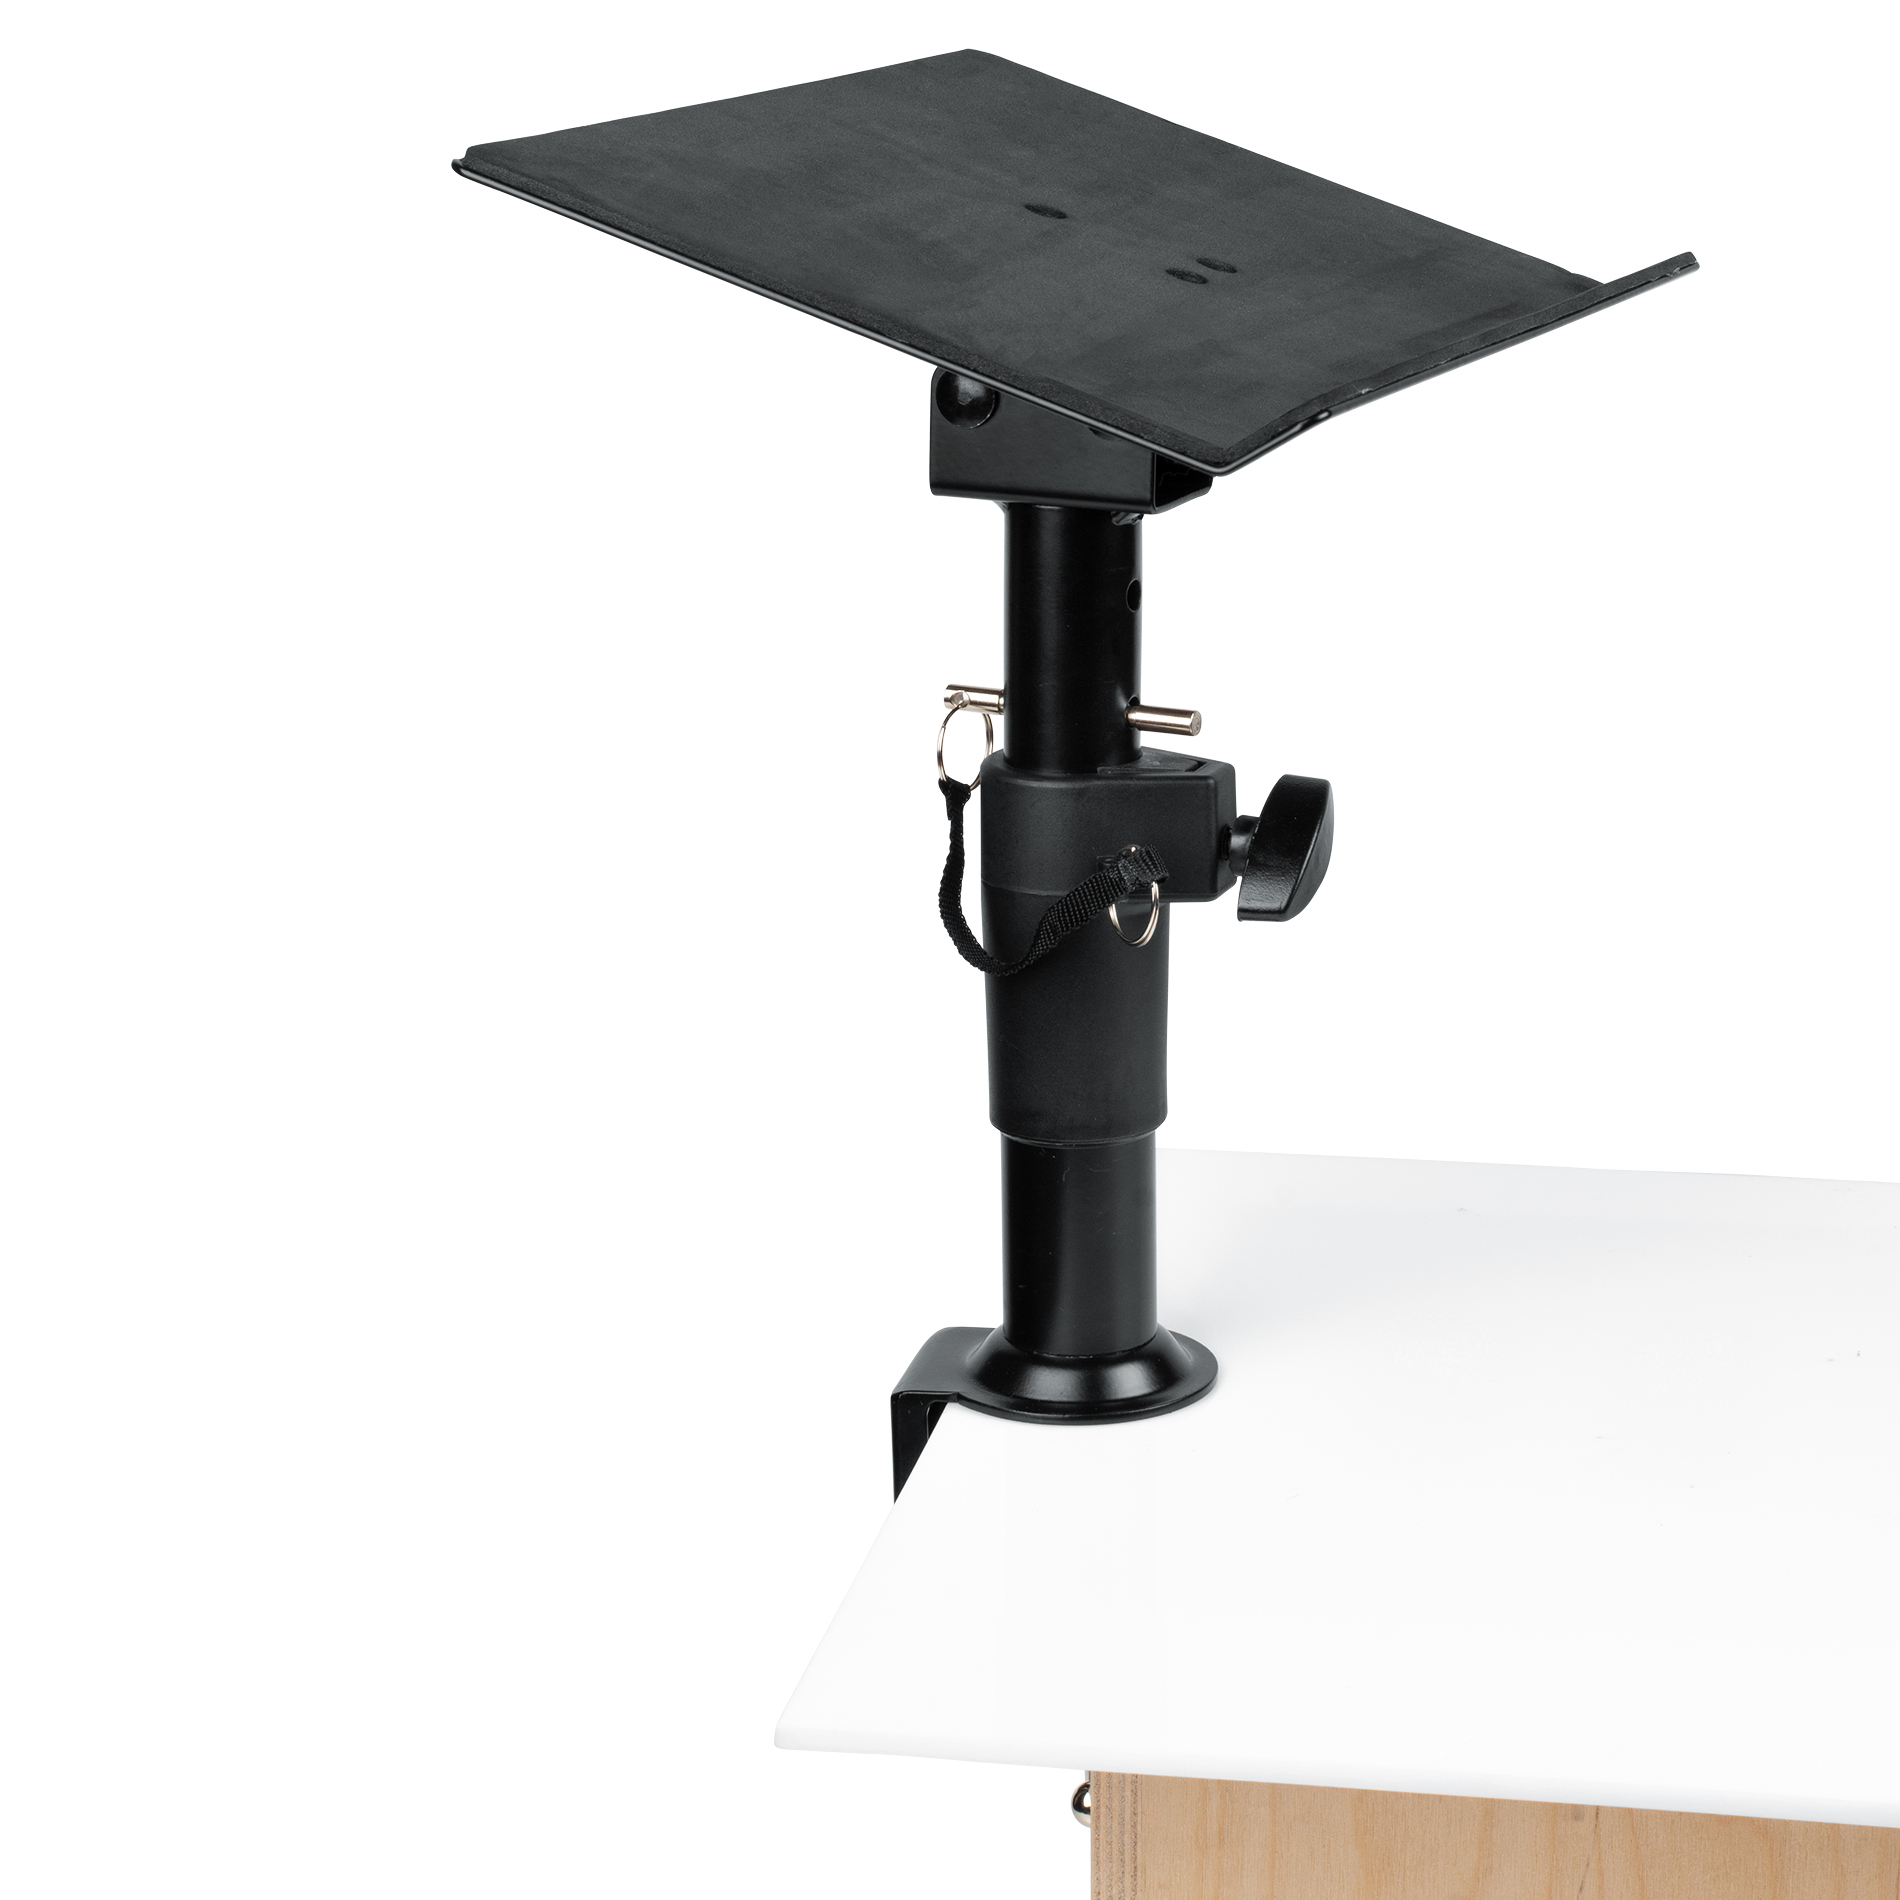 Clampable Laptop And Accessory Stand-GFWLAPTOP2500